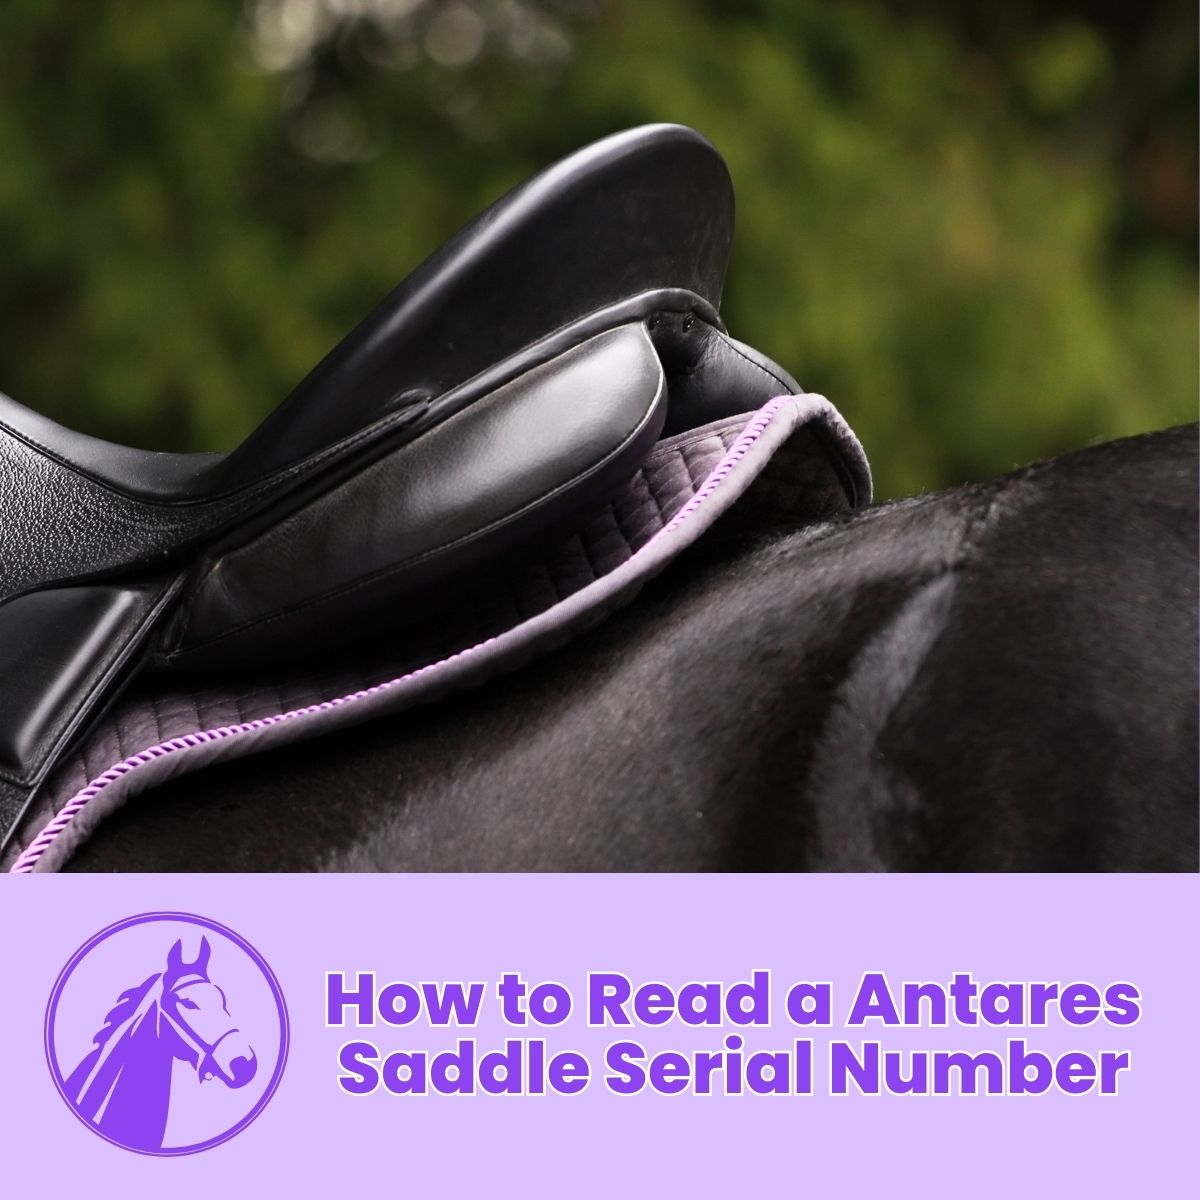 You are currently viewing How to Read a Antares Saddle Serial Number